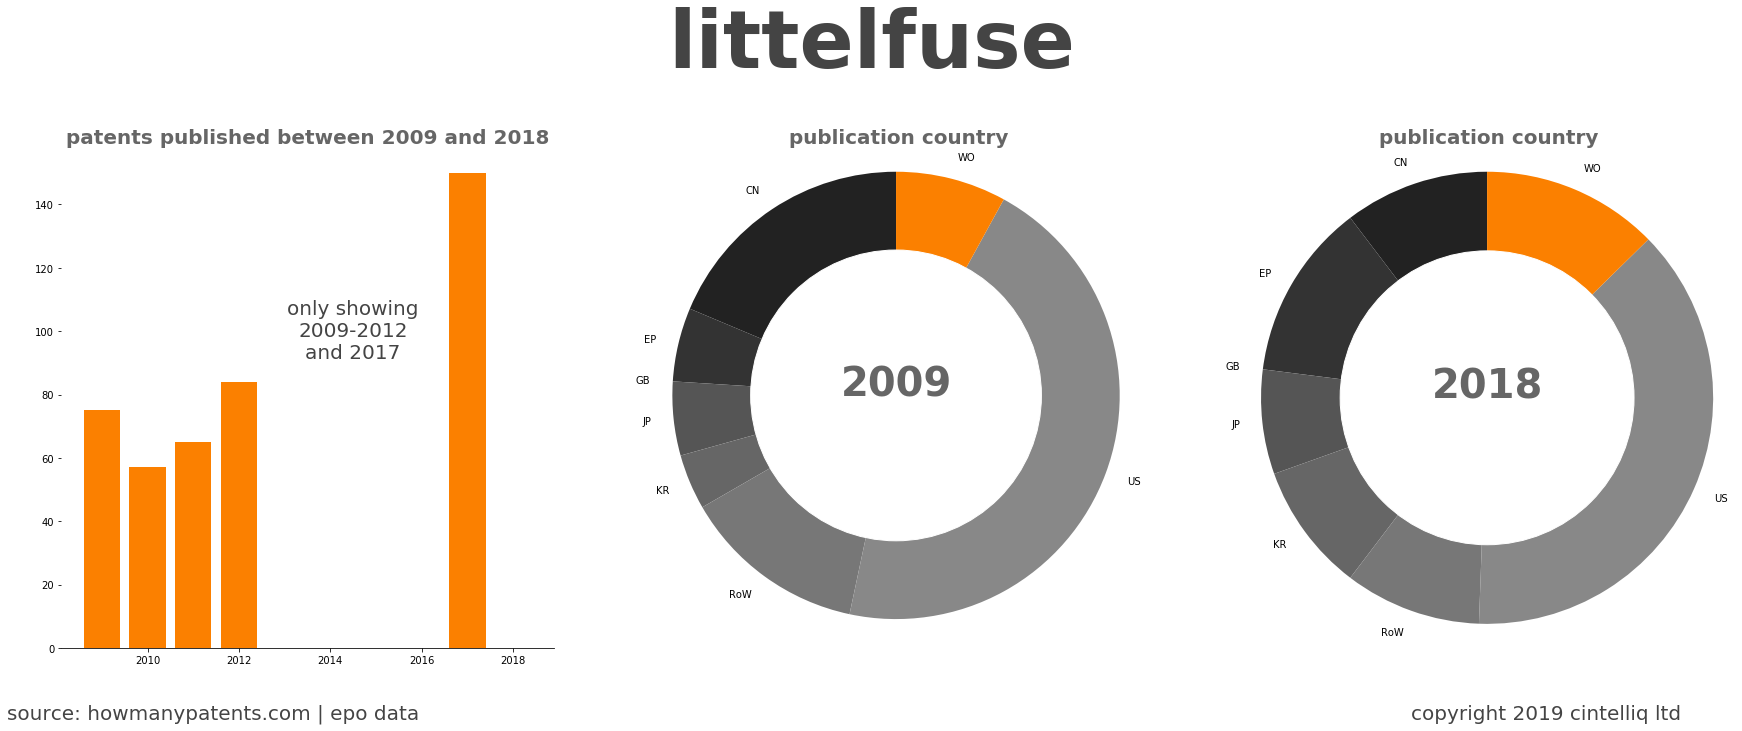 summary of patents for Littelfuse